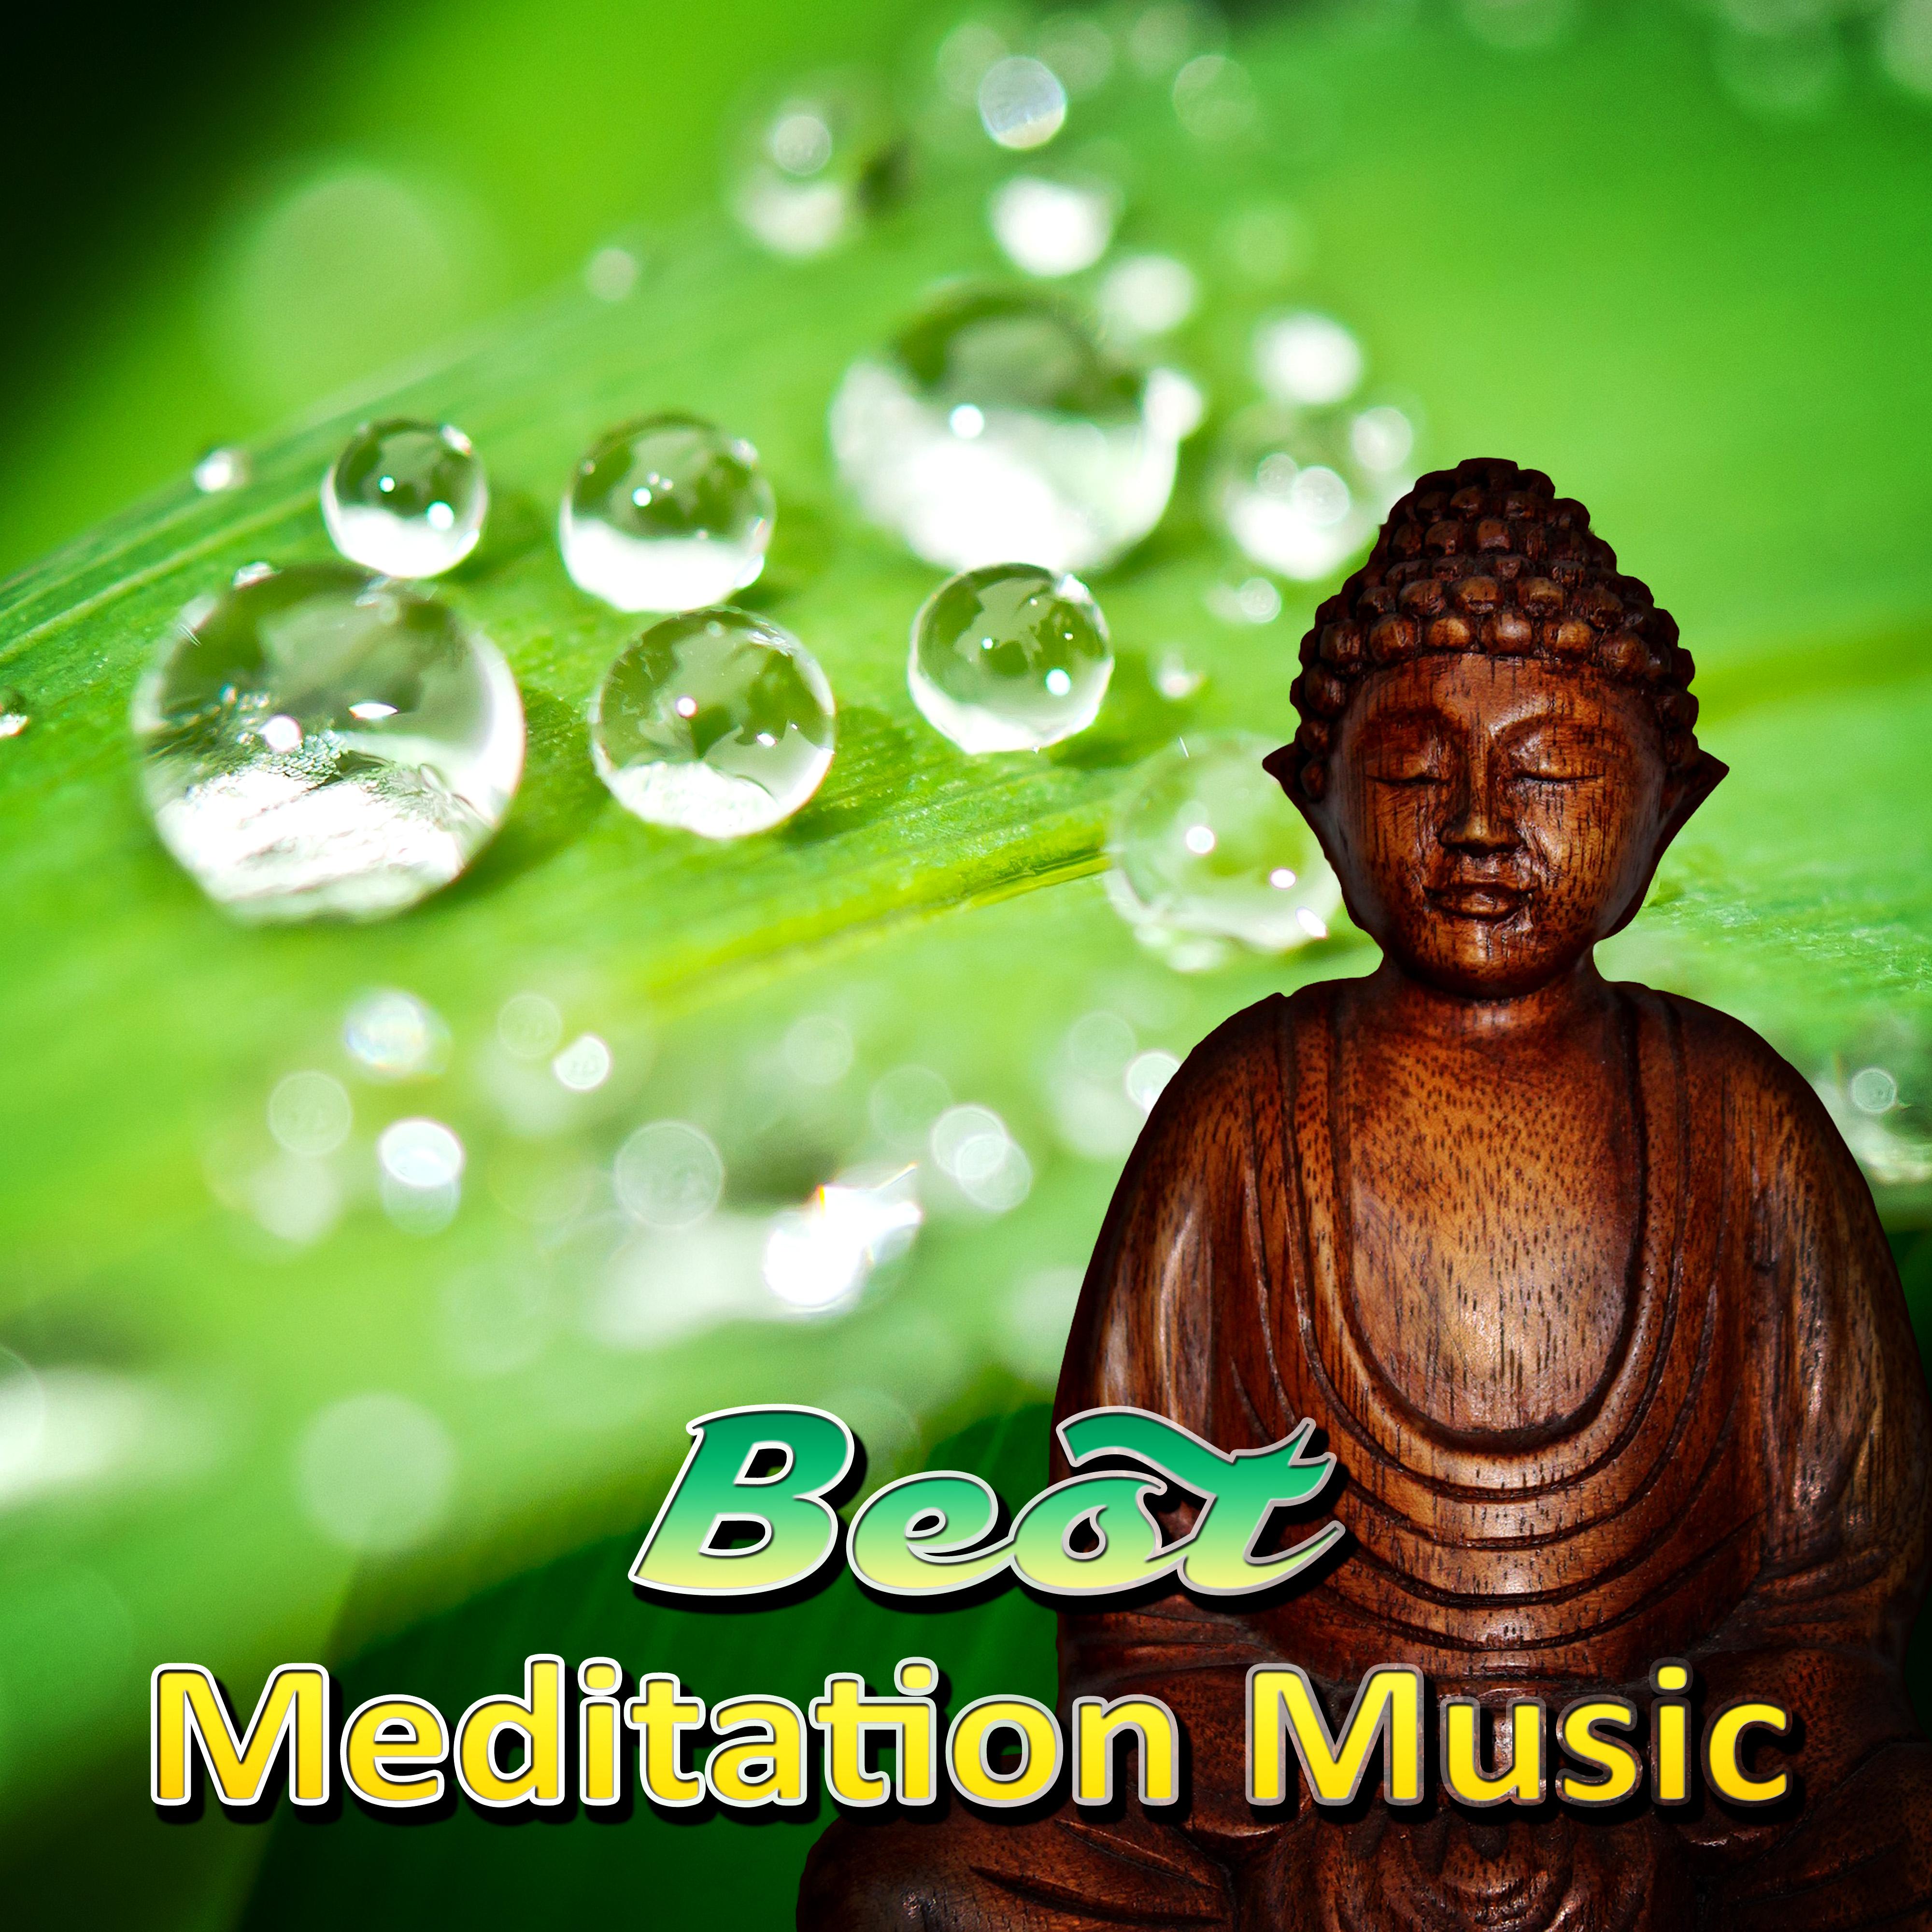 Best Meditation Music - Benefits of Meditation, Soothing Sounds, Music for Sleep,  Music for Concentration & Yoga Healing, Spirituality, Reduce Stress, Study